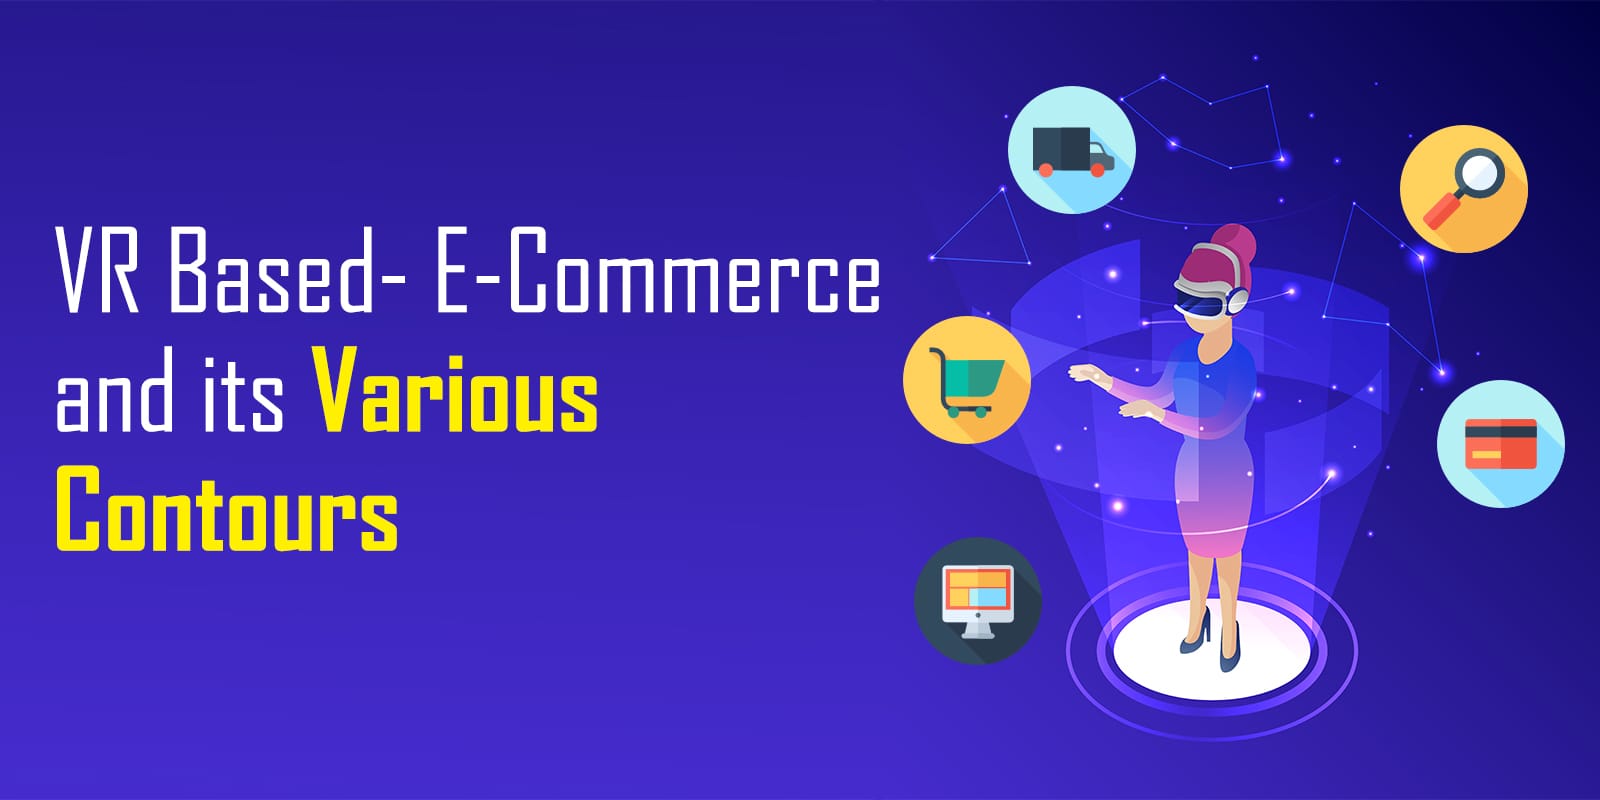 VR Based Ecommerce and its Various Contours